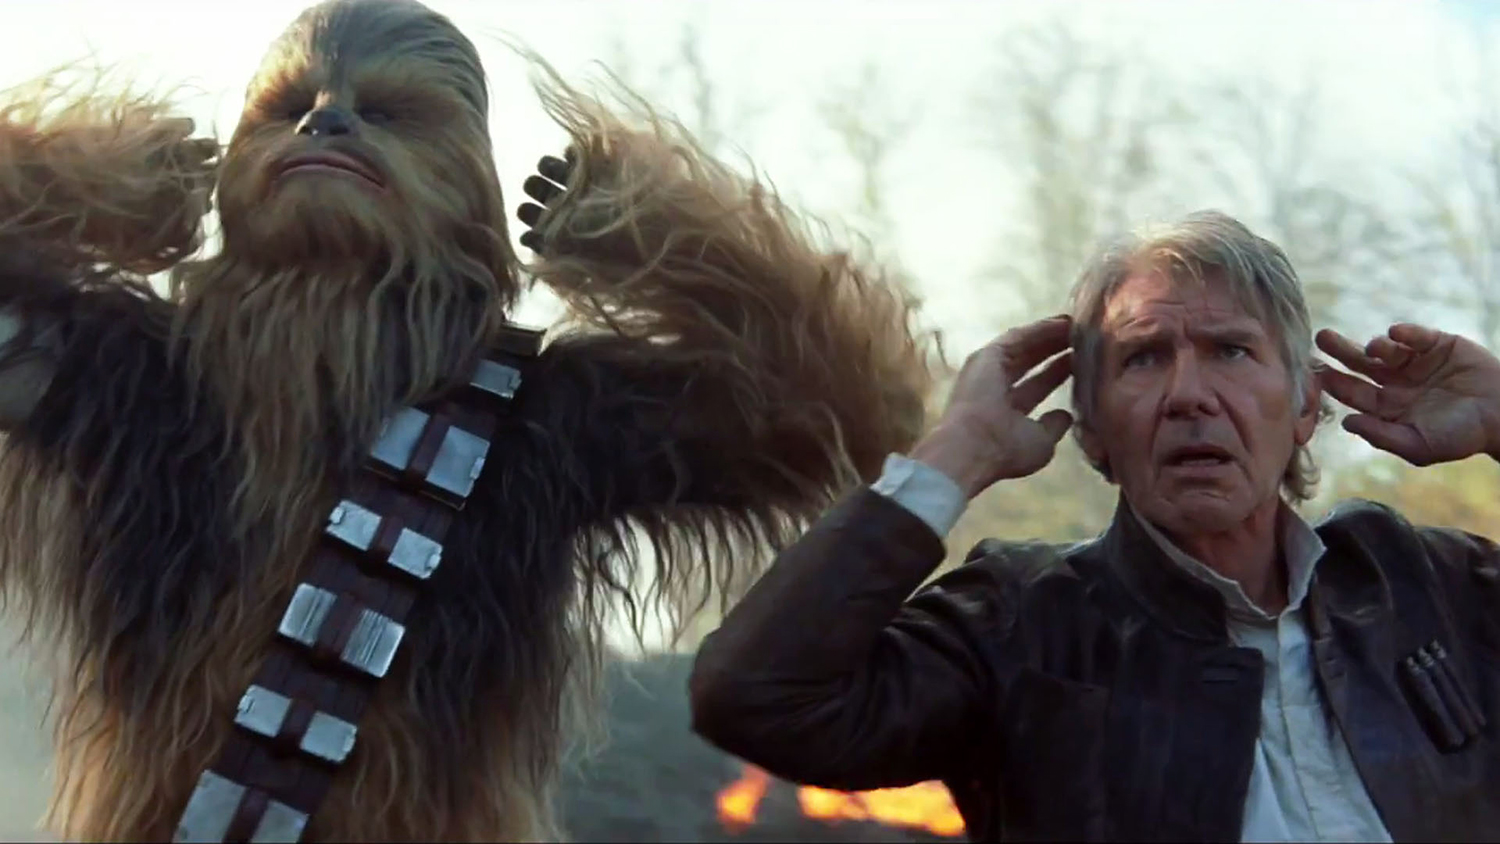 Chewbacca and Han Solo with their hands behind their heads in Star Wars The Force Awakens.